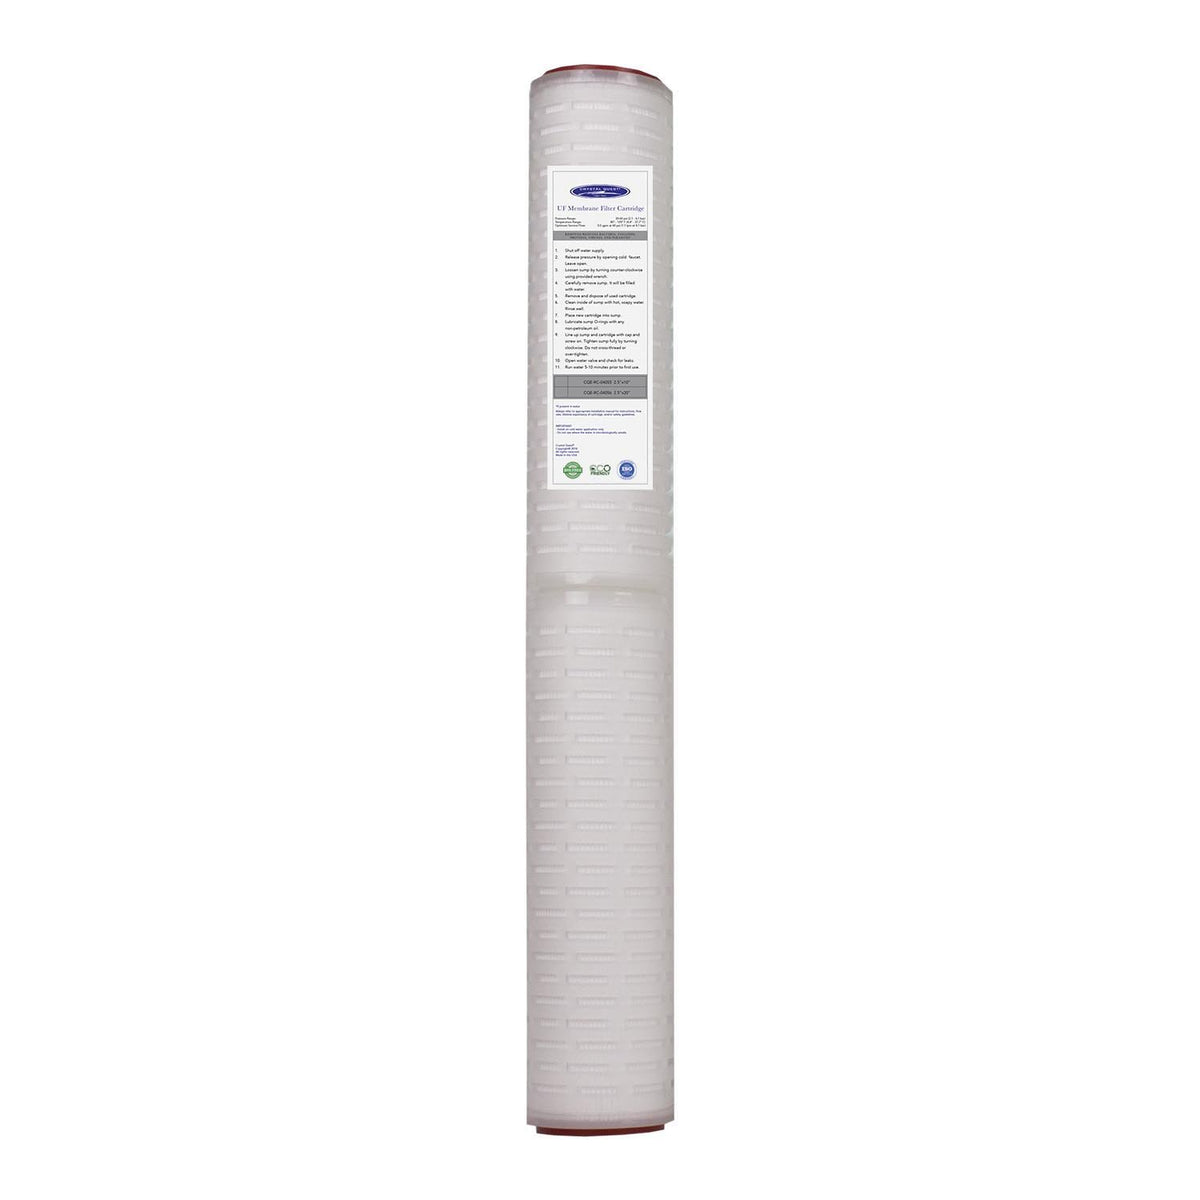 2-7/8" x 20" Ultrafiltration (UF) Water Filter Membrane - Water Filter Cartridges - Crystal Quest